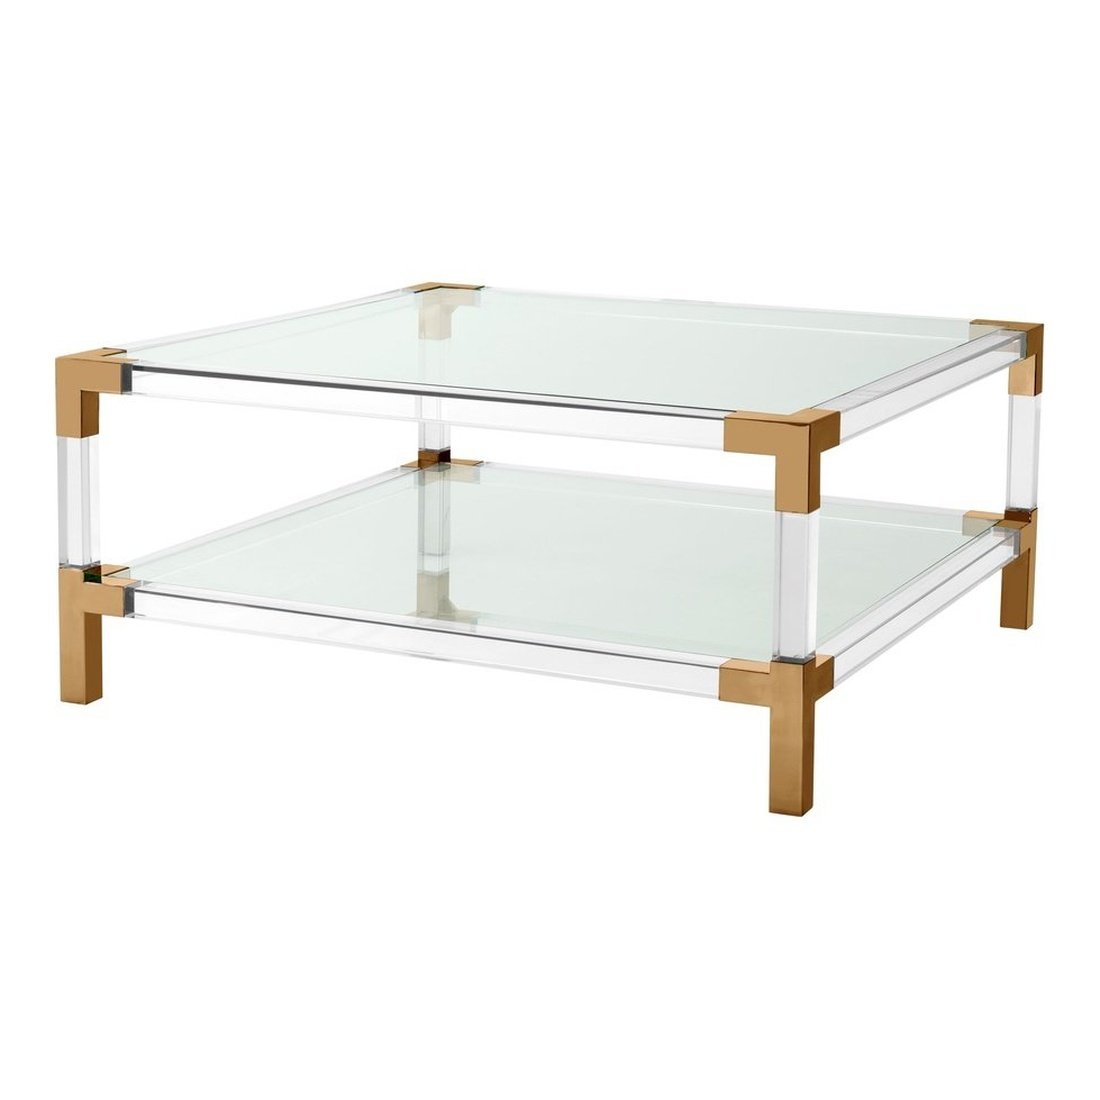 Eichholtz Royalton Coffee Table in Brushed Brass Finish